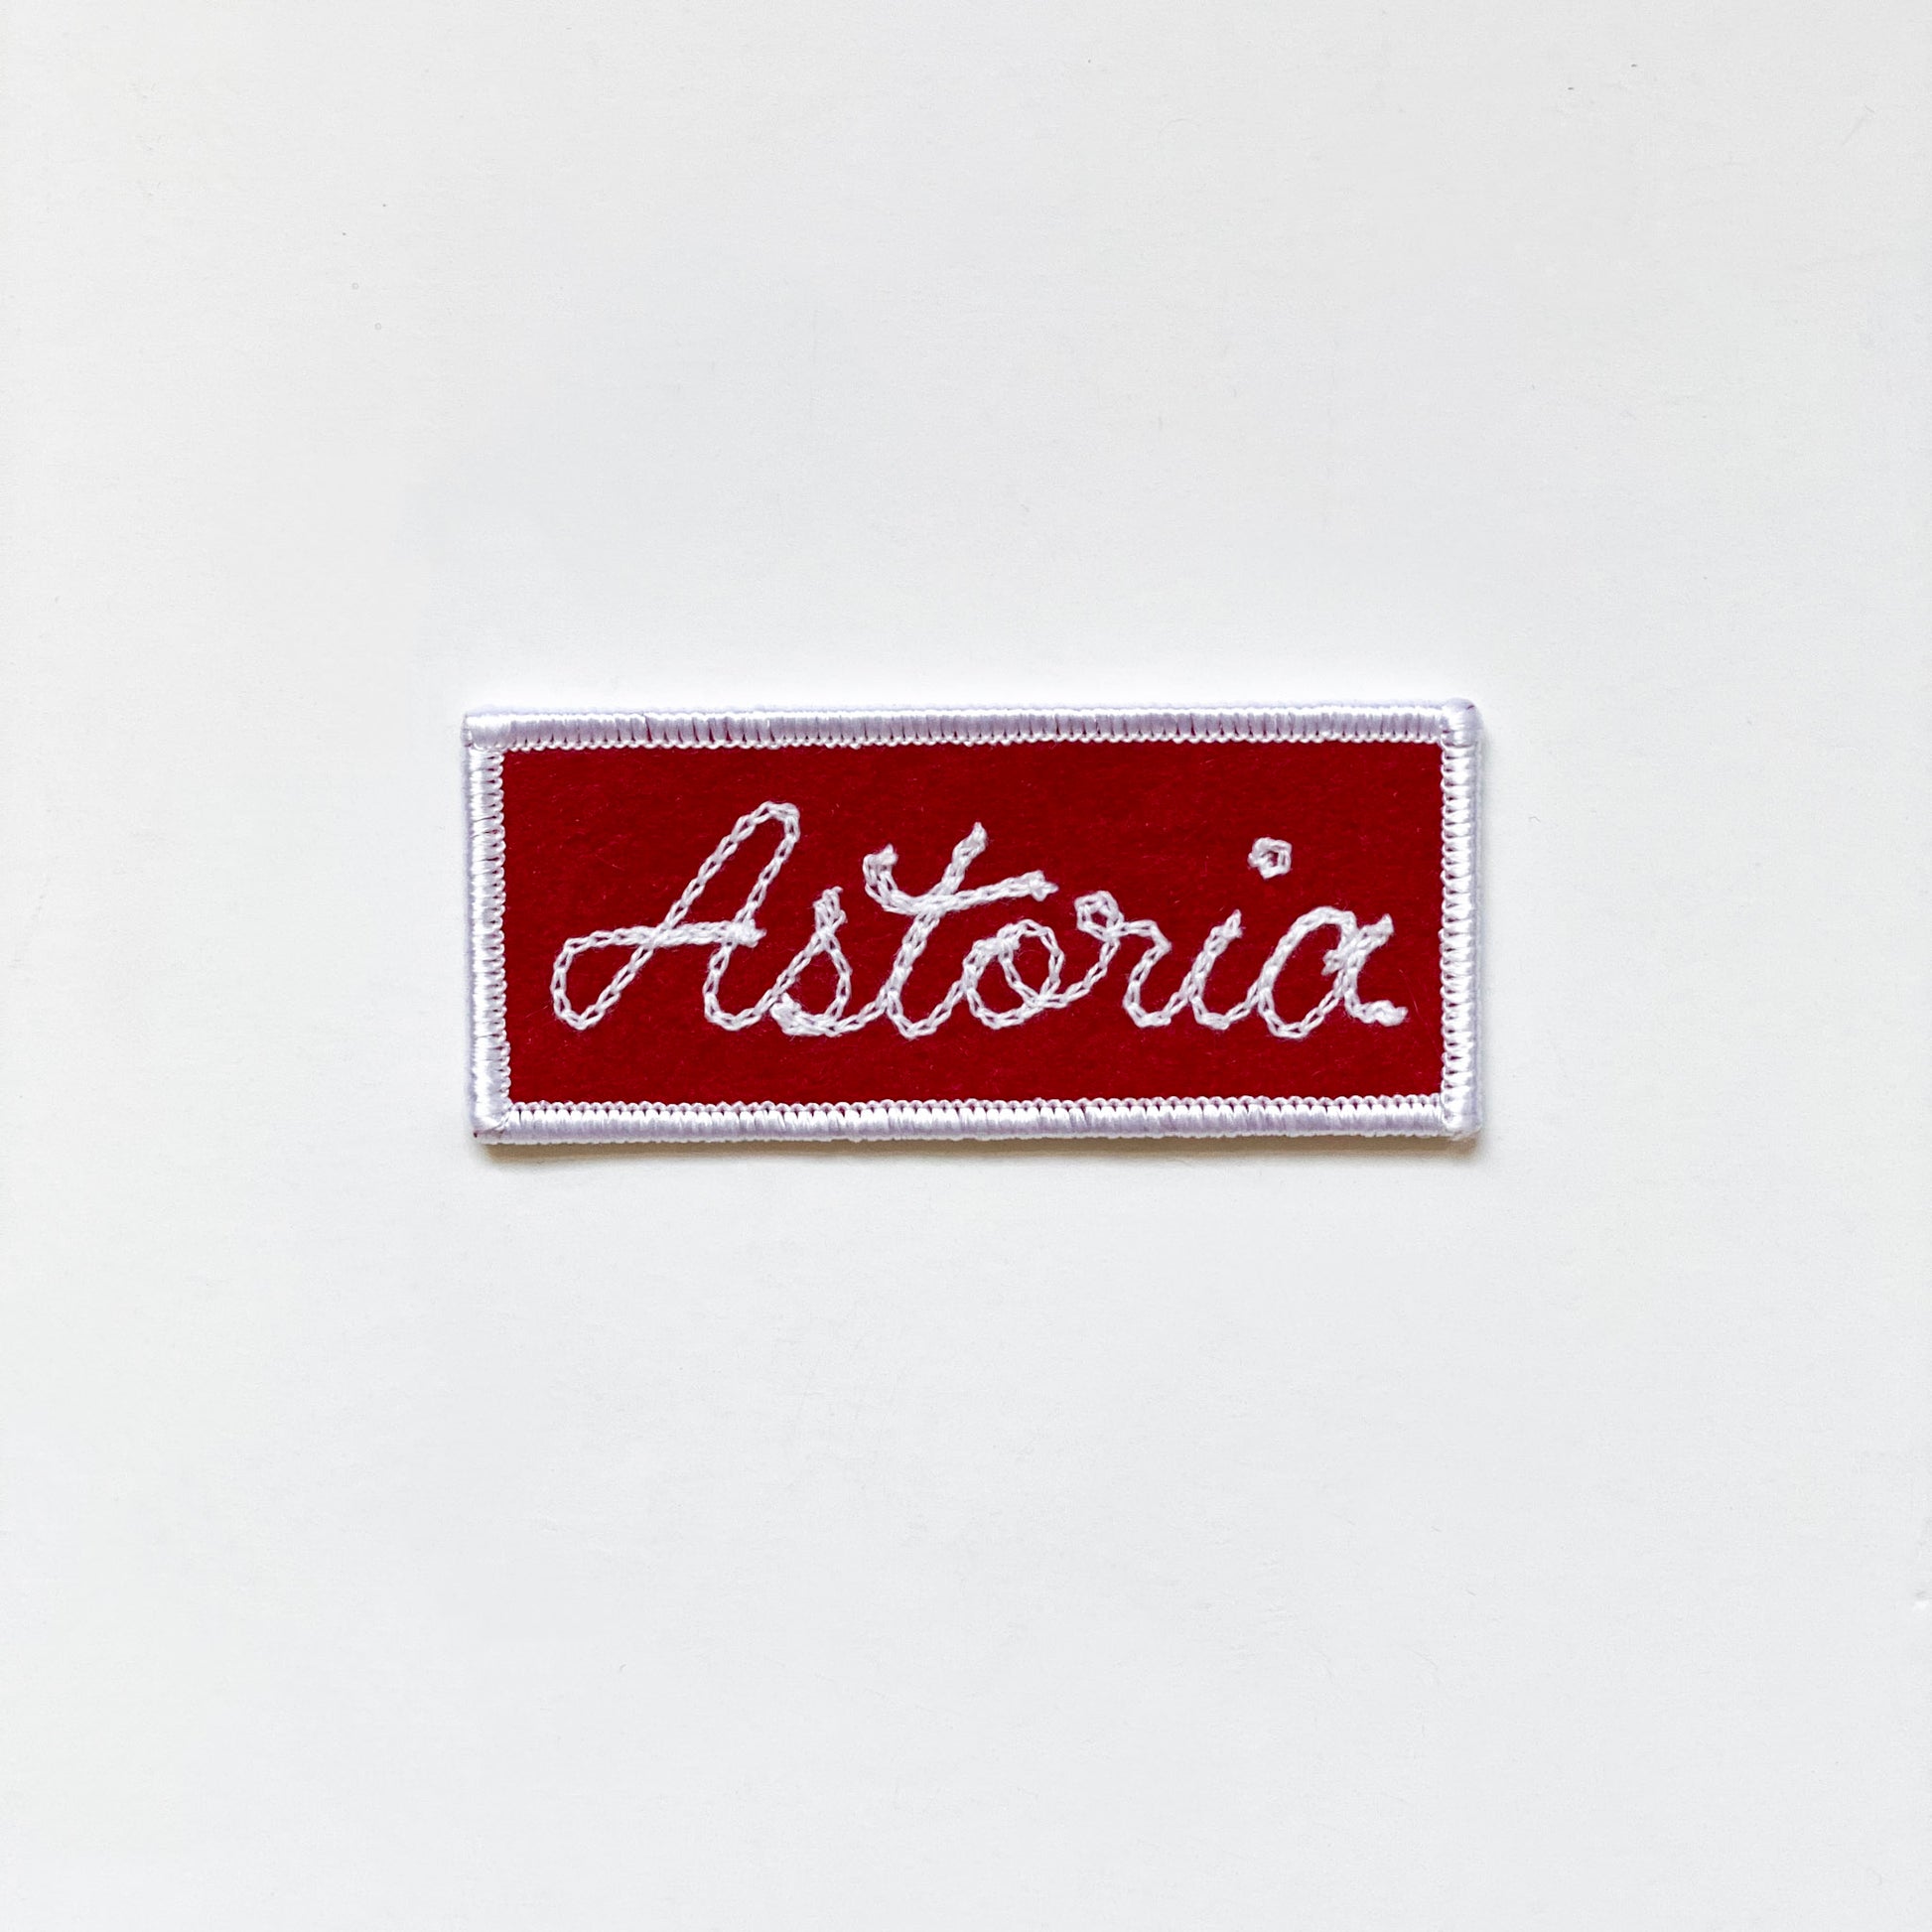 Handmade, custom "Astoria" rectangle patch in red felt with white embroidery. 